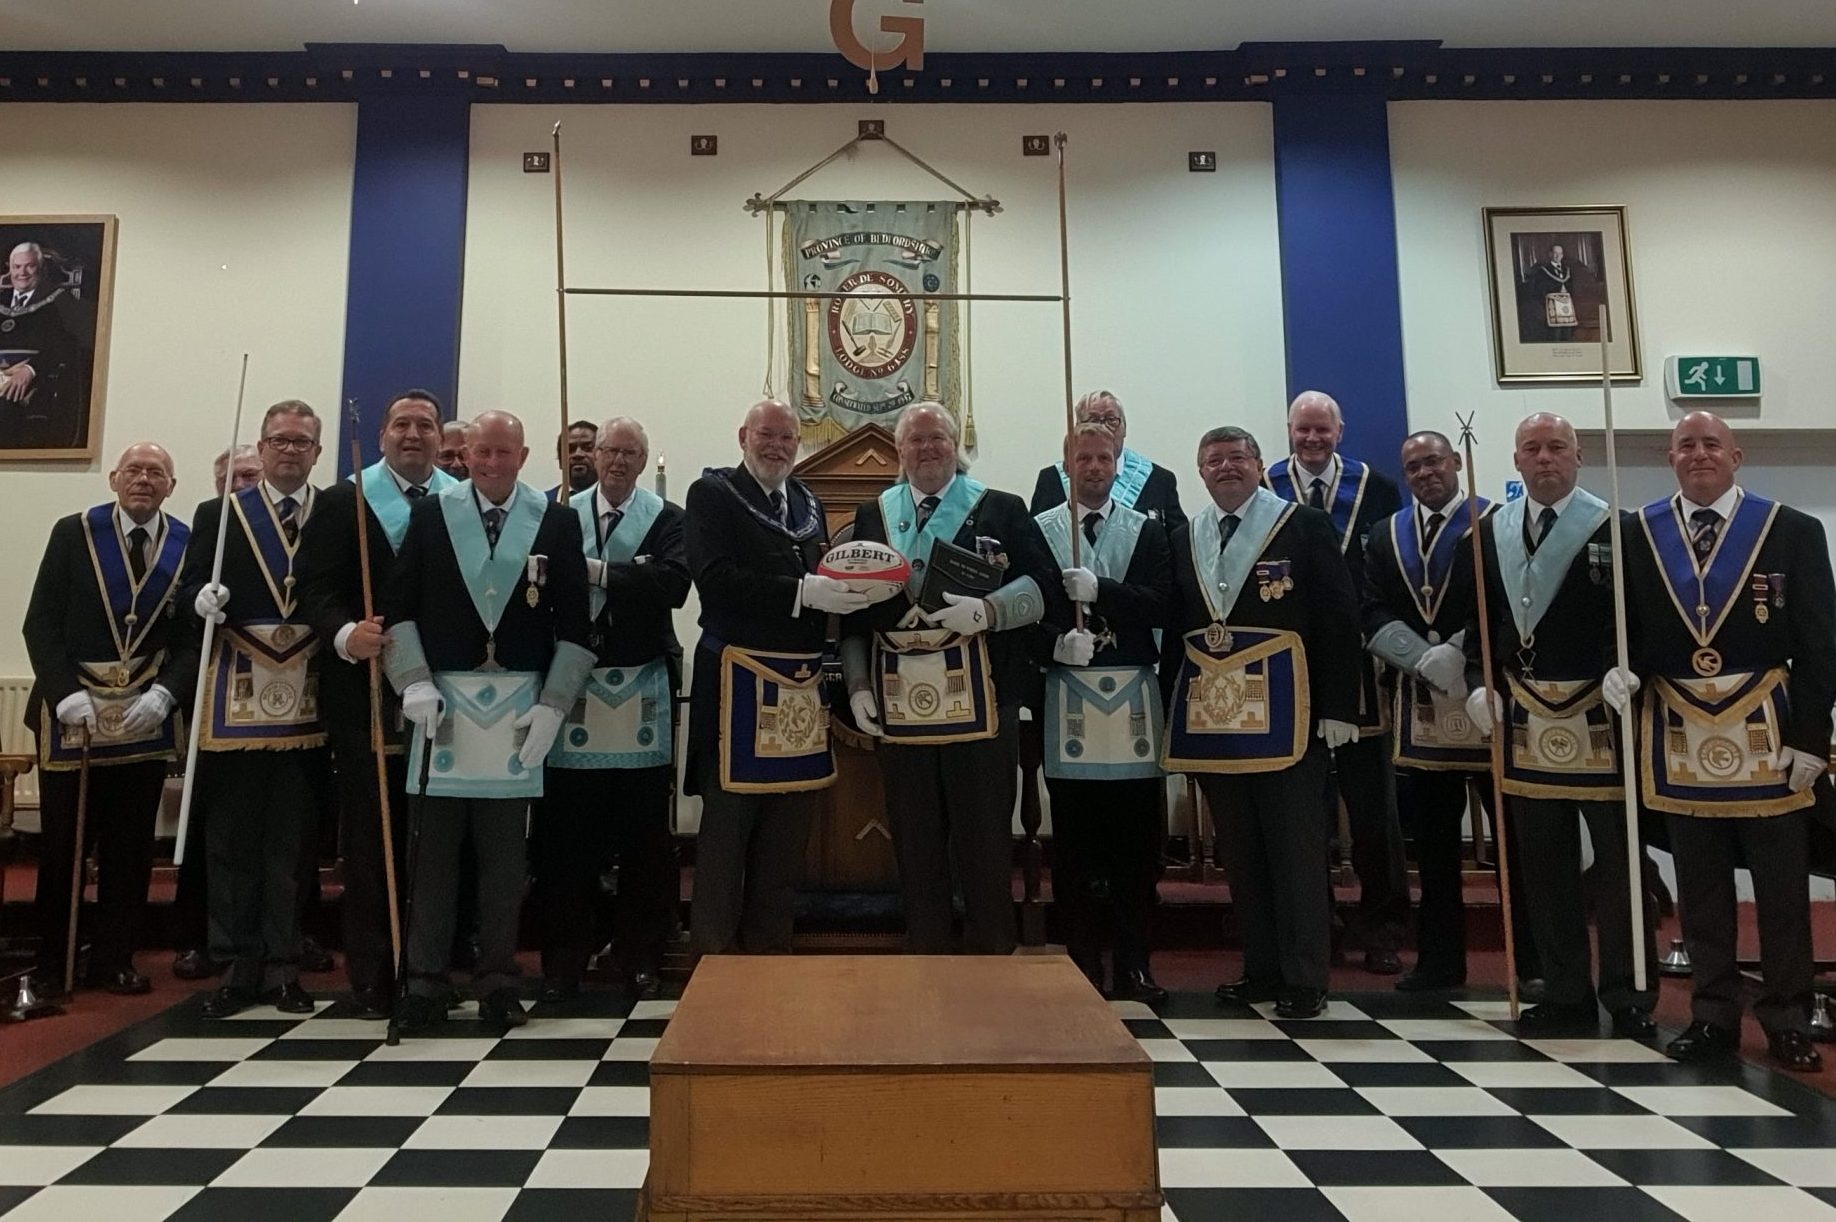 Roger de Somery now Officially a Rugby Lodge